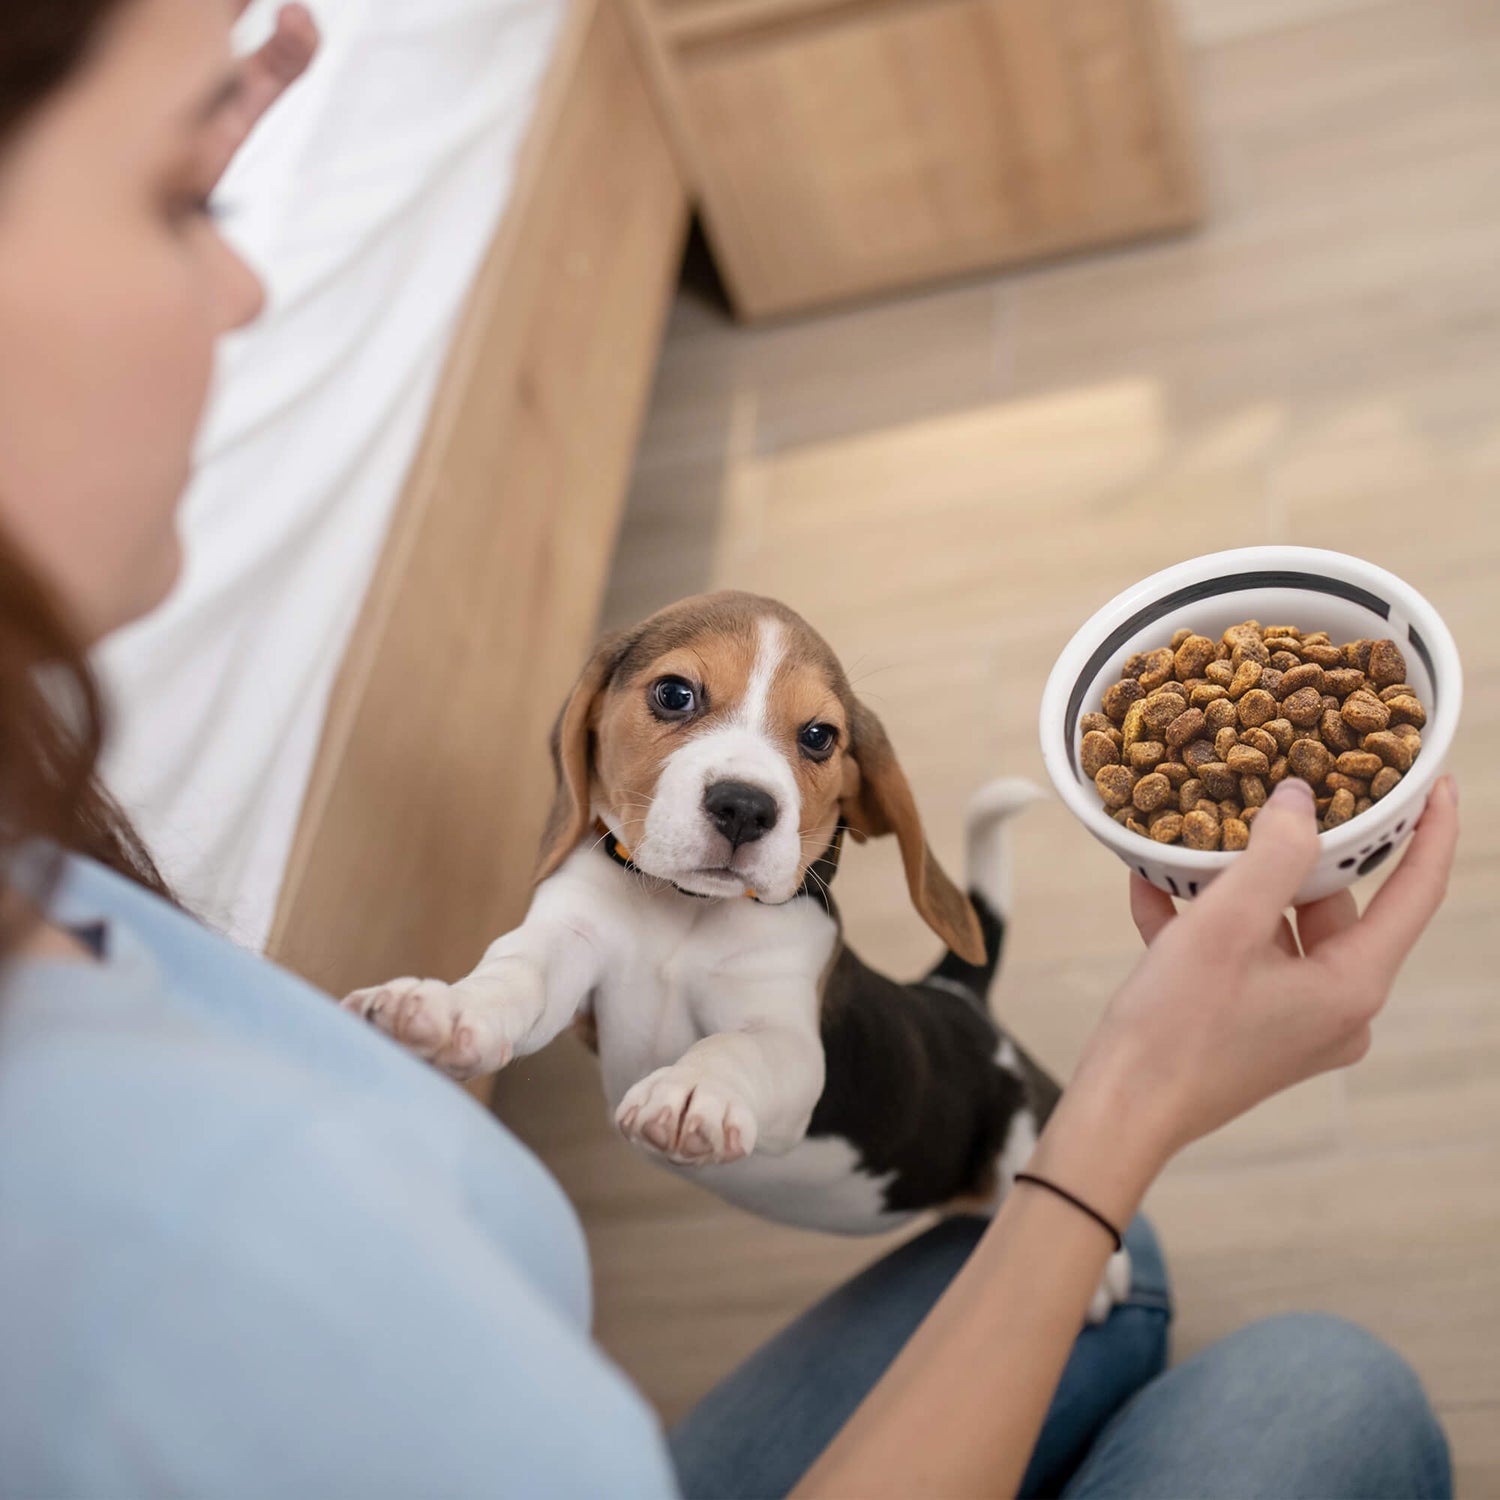 Feeding Furry Friends: Nourishing Your Pet with the Best Food and Accessories